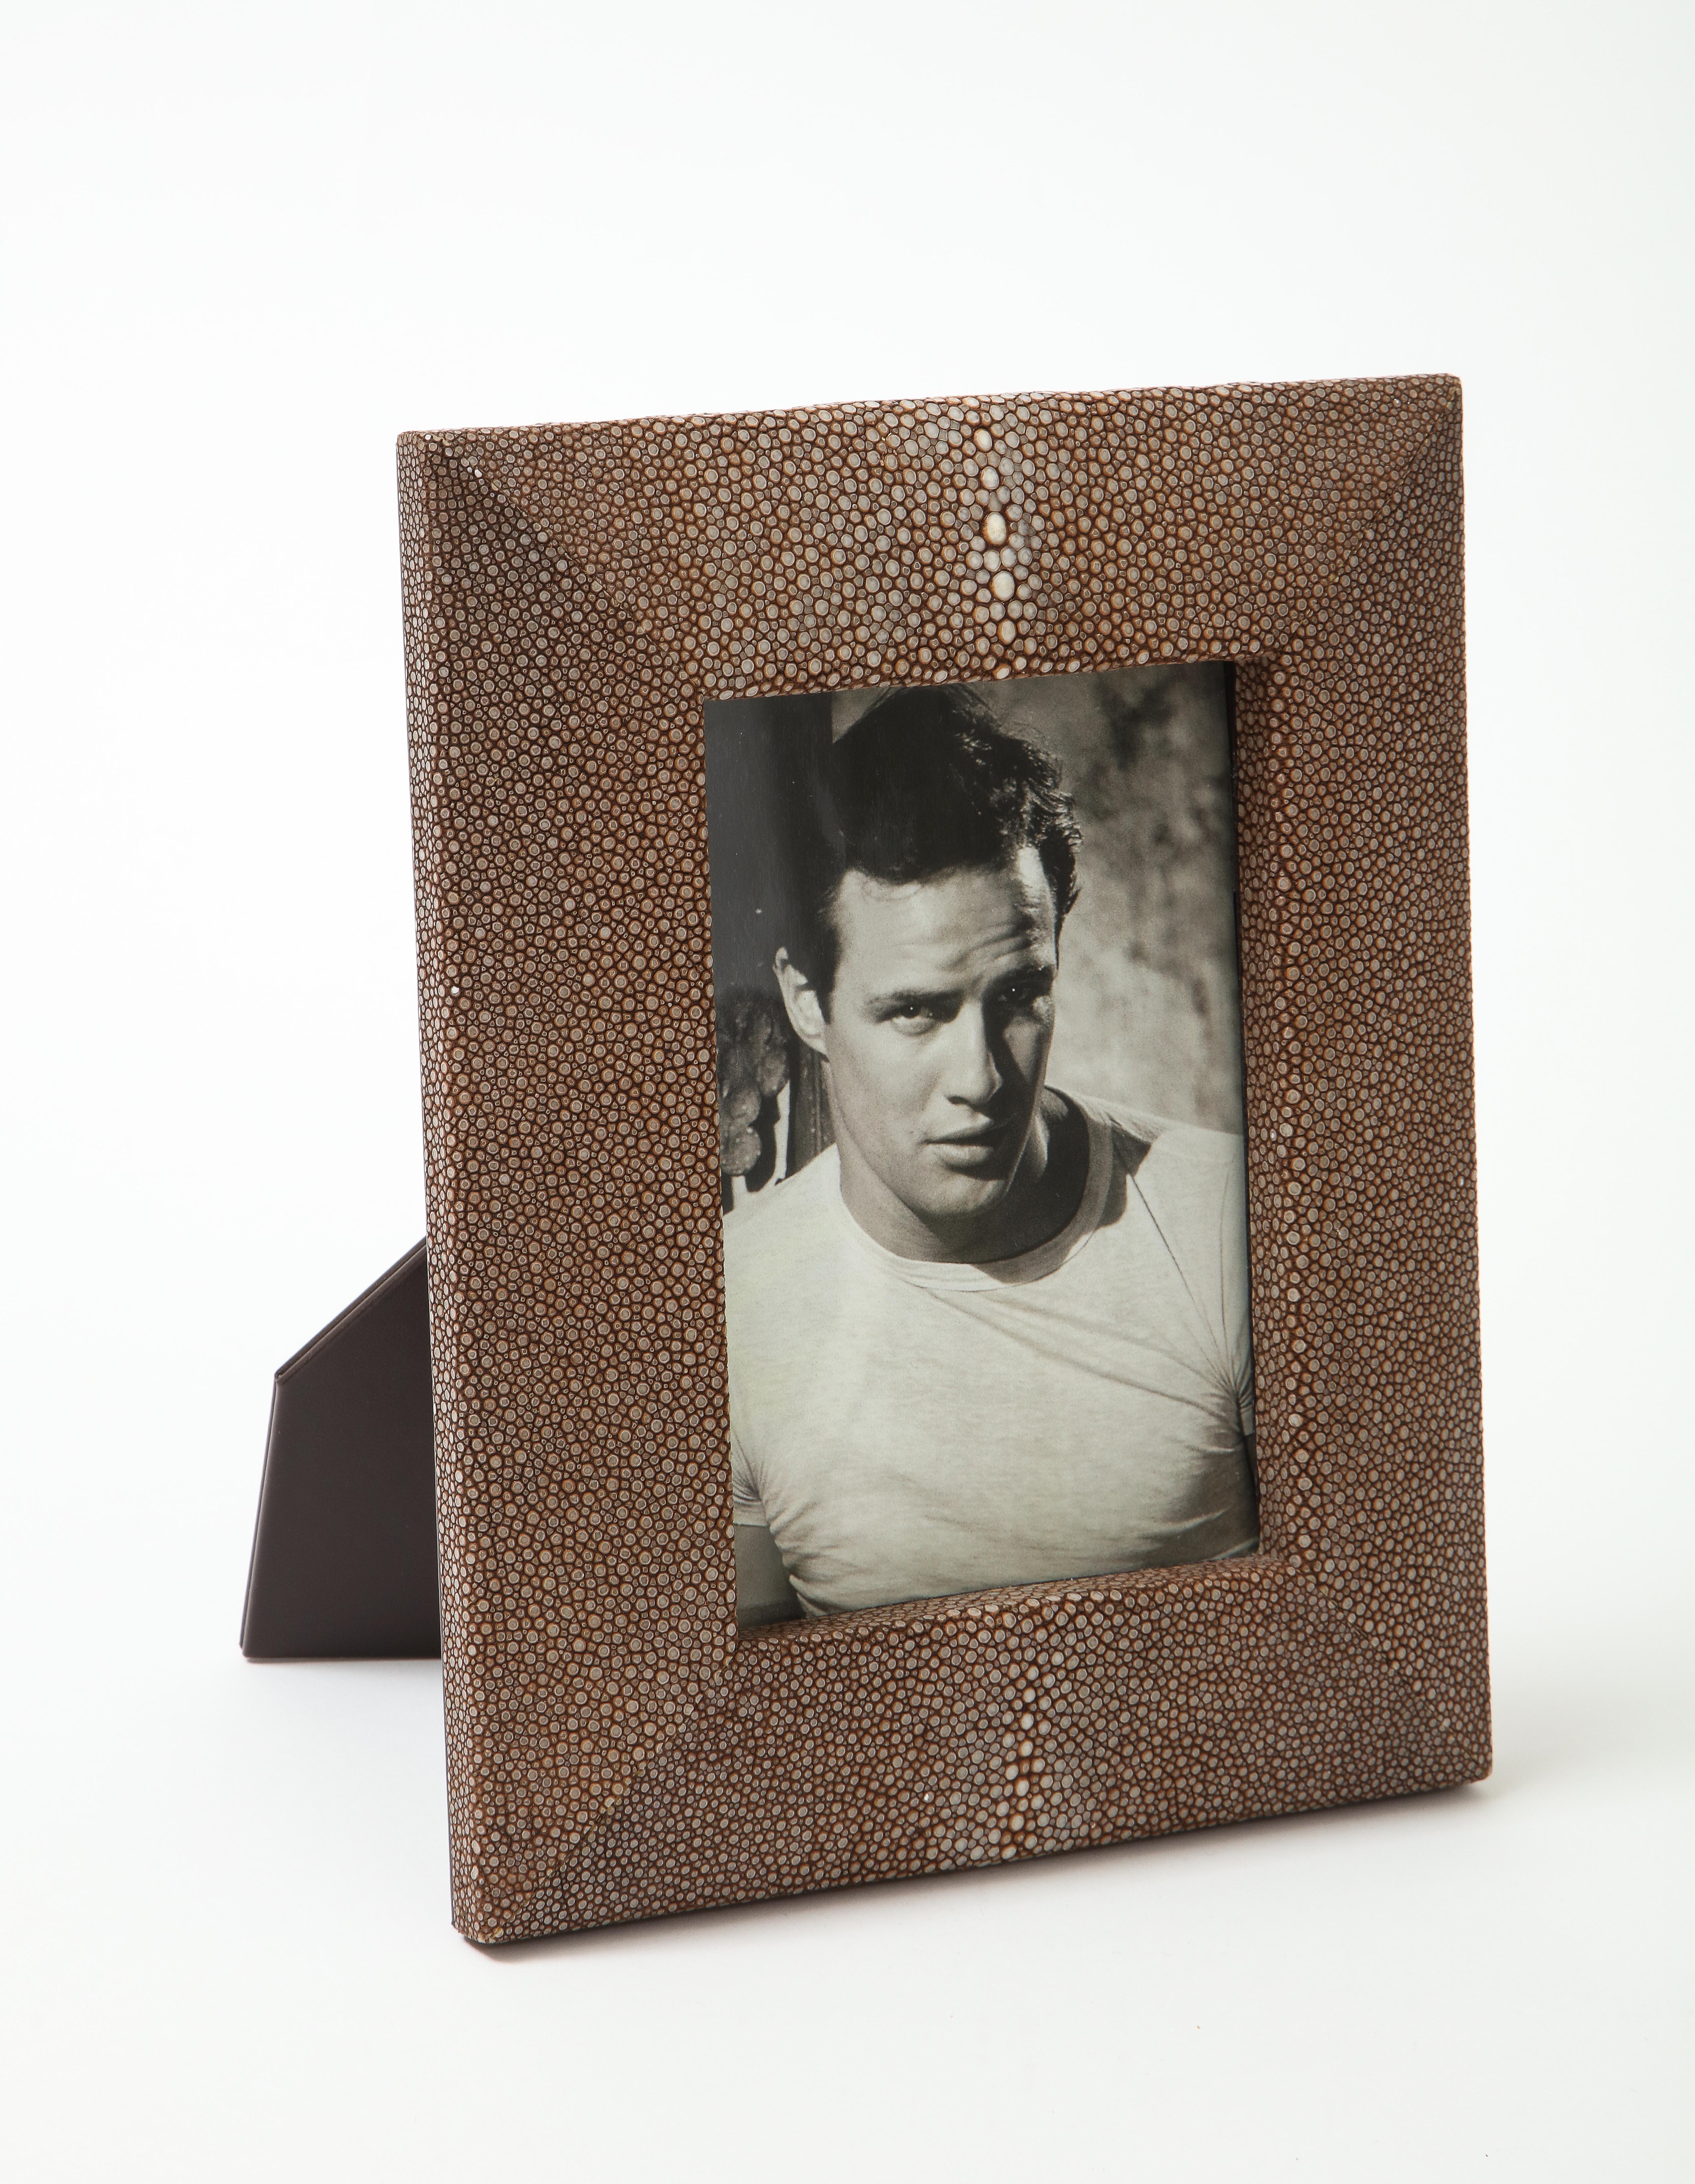 Hand made picture frame featuring cocoa brown, ivory genuine shagreen dimensional border. Interior picture size is 6.5 x 4.5 inches.